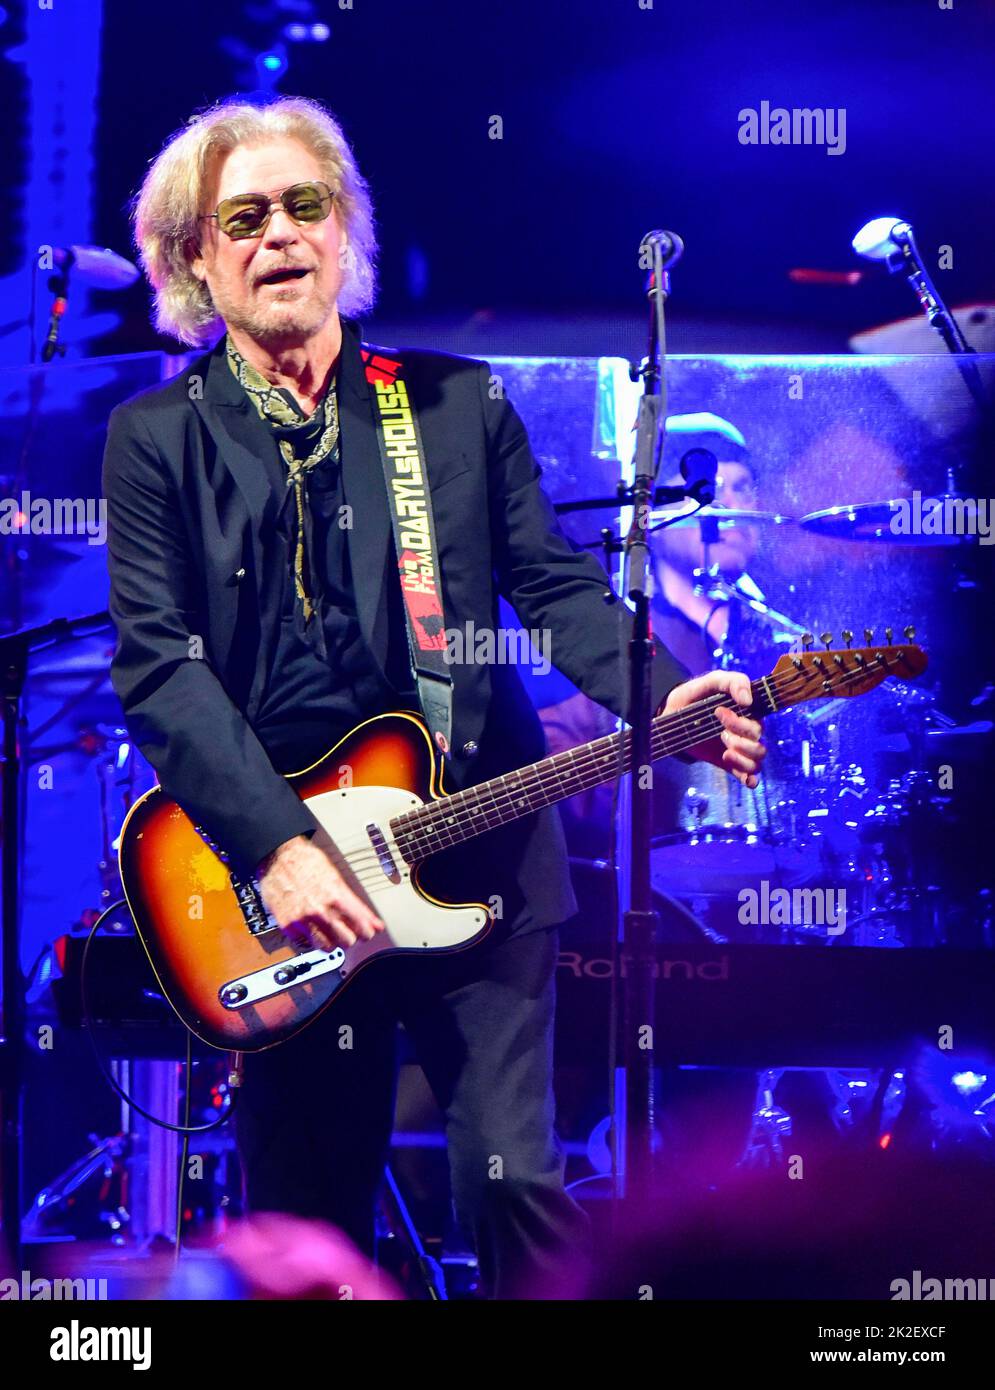 Redondo Beach, California September 16, 2022 - Daryl Hall of Hall and Oates performing on stage at BeachLife Ranch, Credit - Ken Howard/Alamy Stock Photo